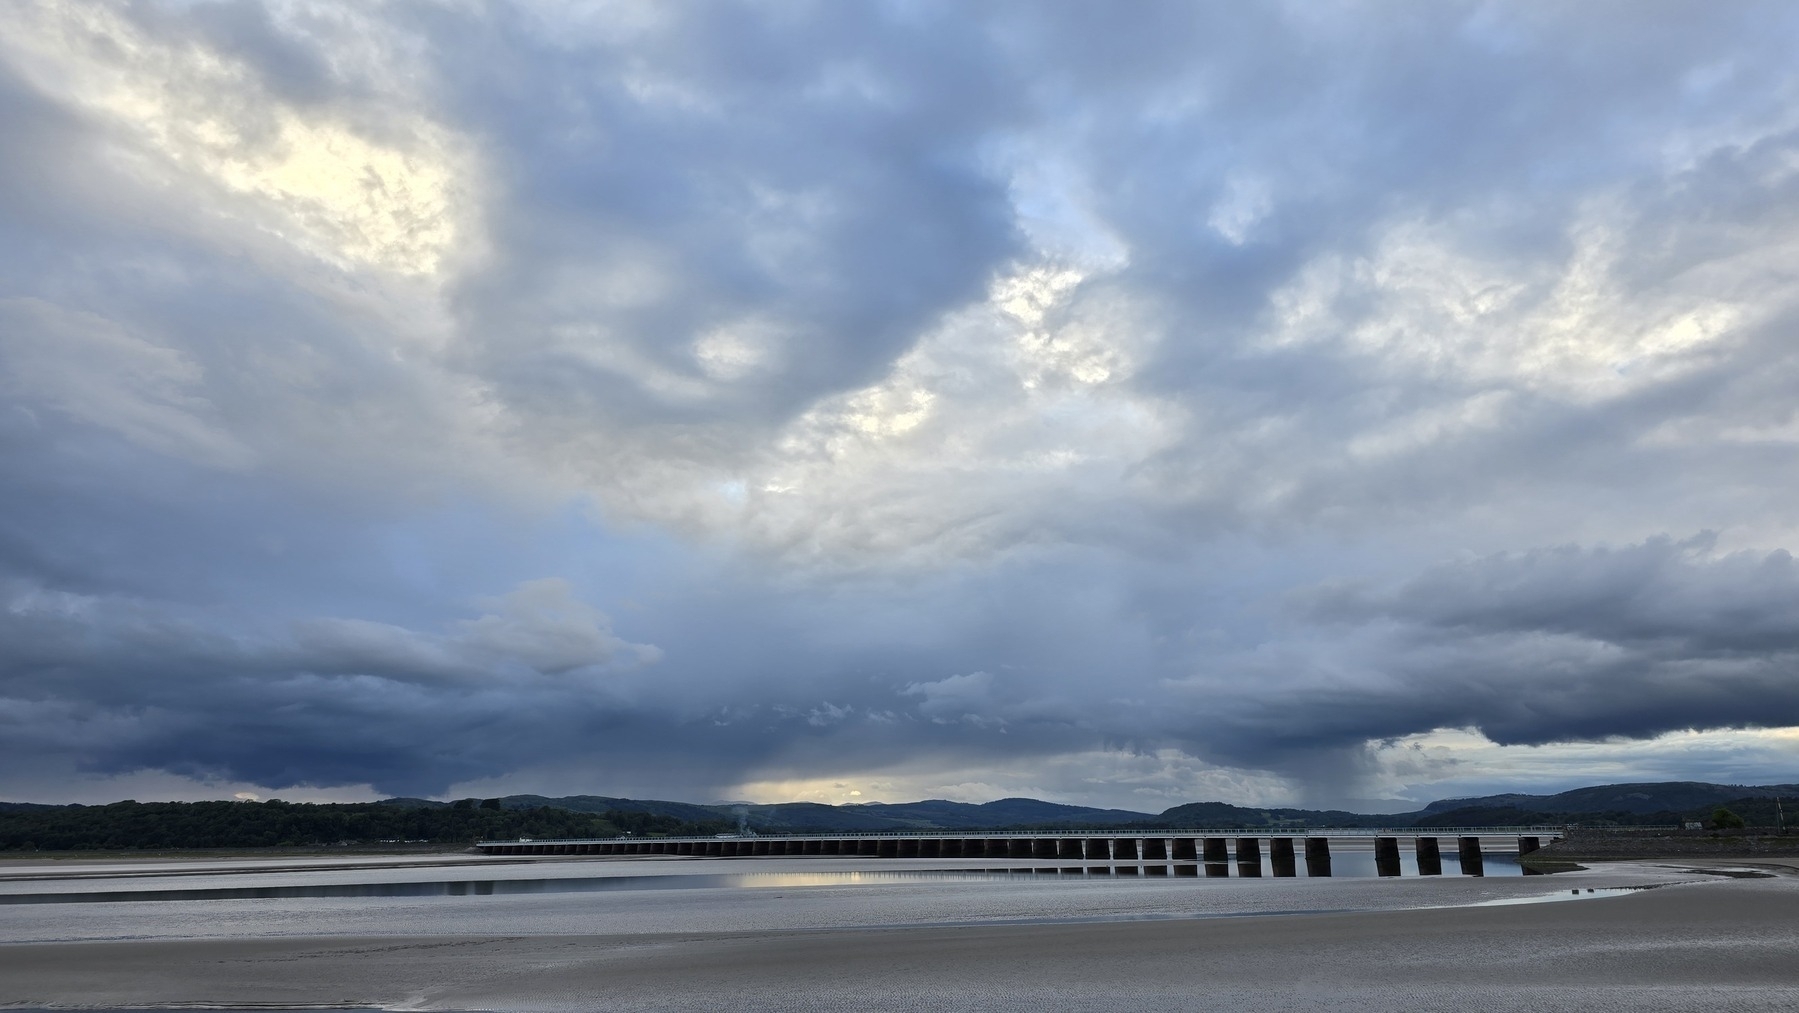 Landscape of a swirling, blue and grey cloudy sky taken over an estuary with a train bridge in the distance